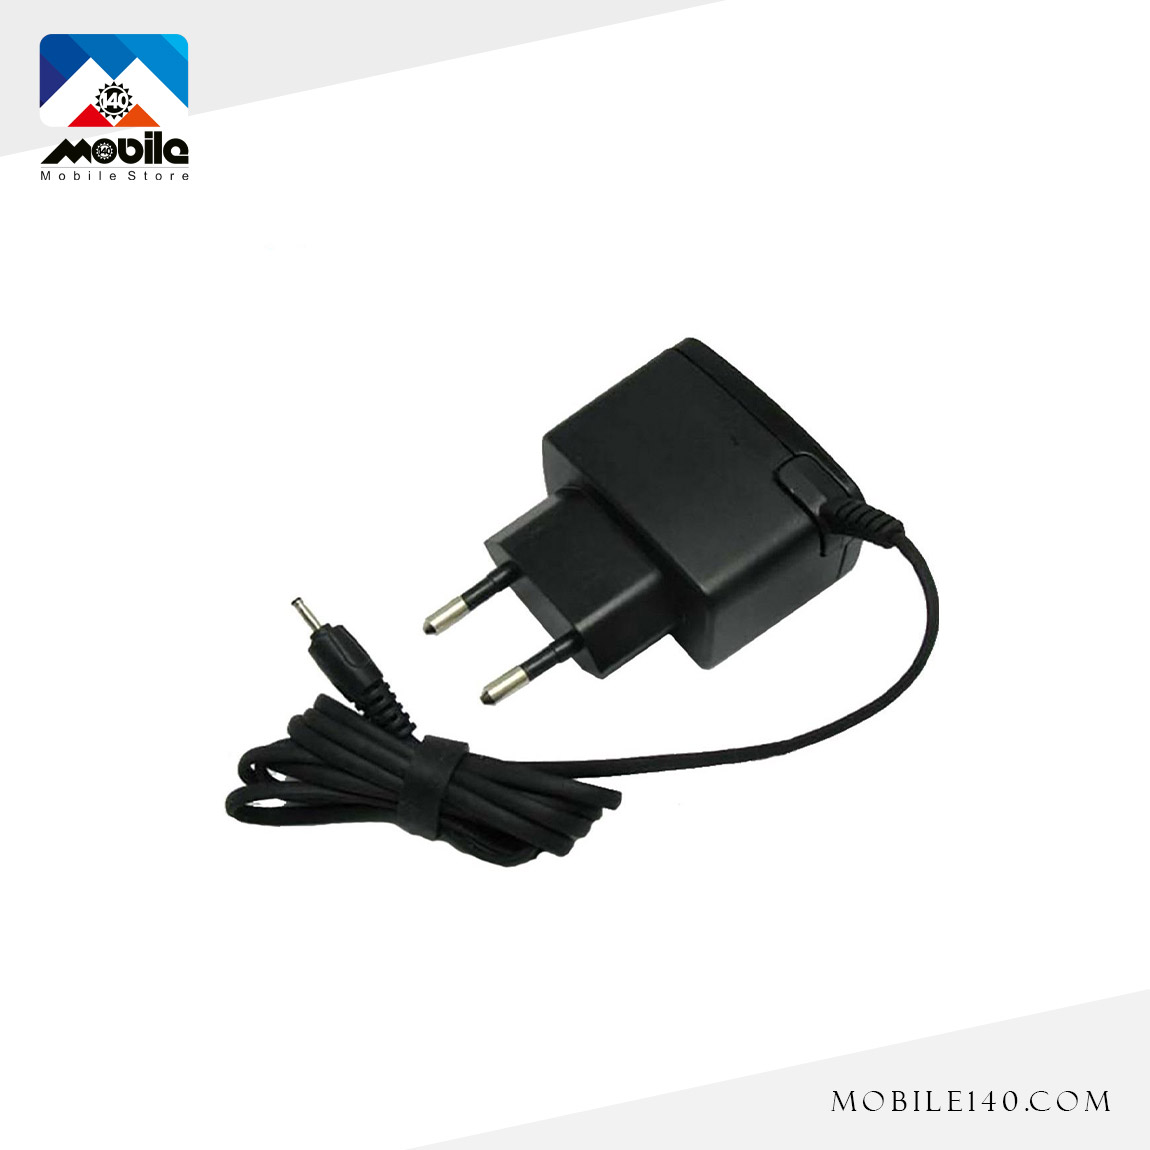 AAPN4061A 2mm pin Charger 2